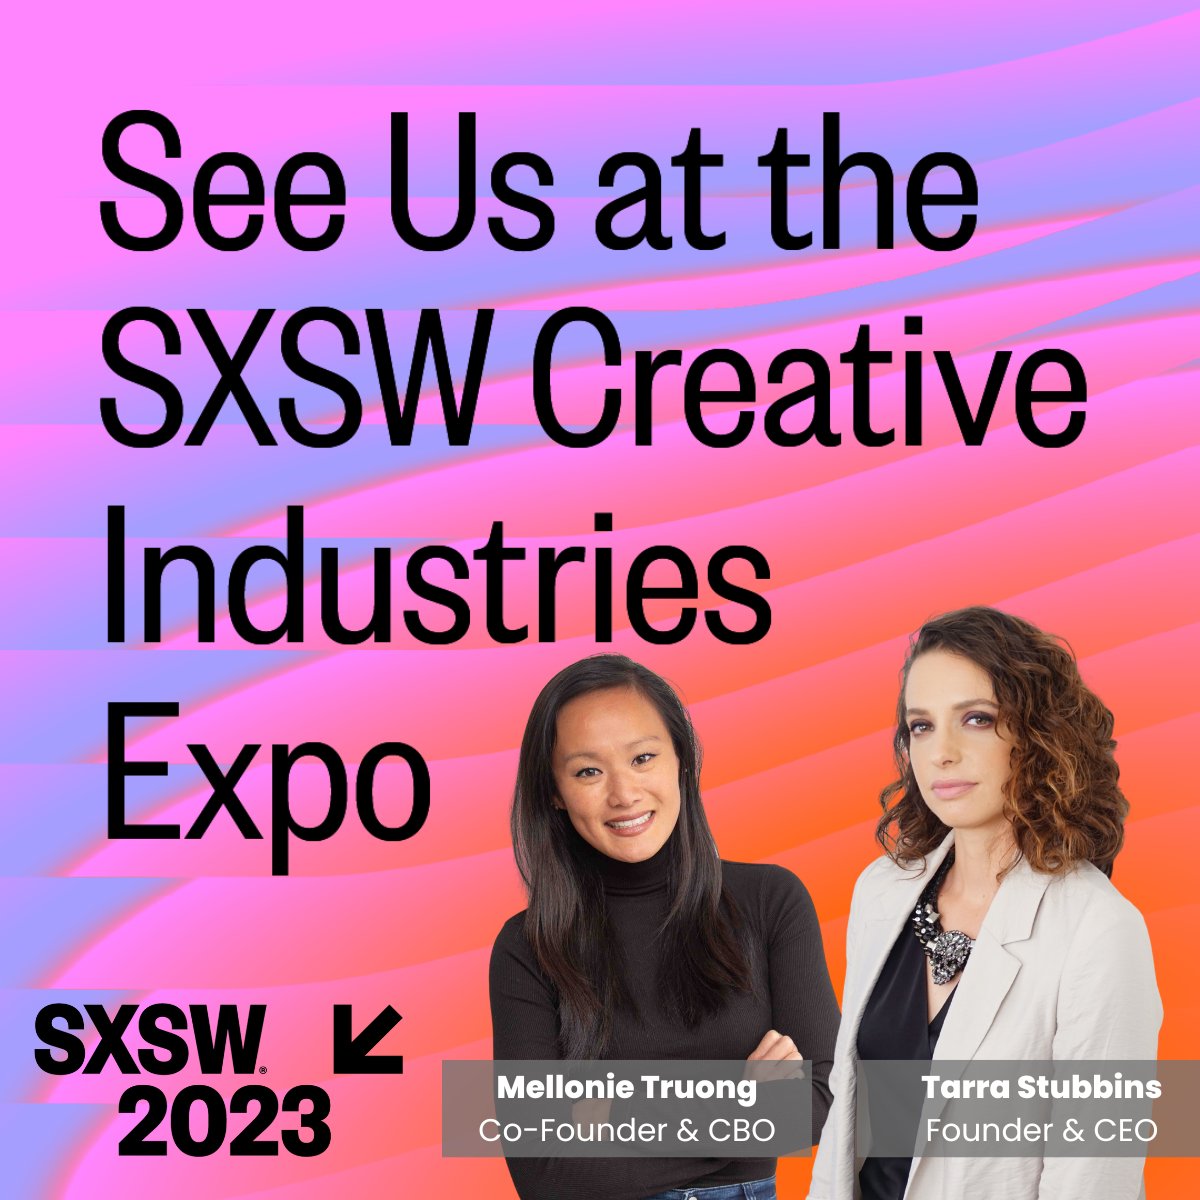 The Take It Easy Team will be in Austin, TX at SXSW, March 11-15. Visit us at booth # 543 or book a meeting to see how our team of experienced #executiveassistants can take you or your #business to the next level: takeiteasygroup.com/scheduleameeti….

#startups #strategicsupport #sxsw